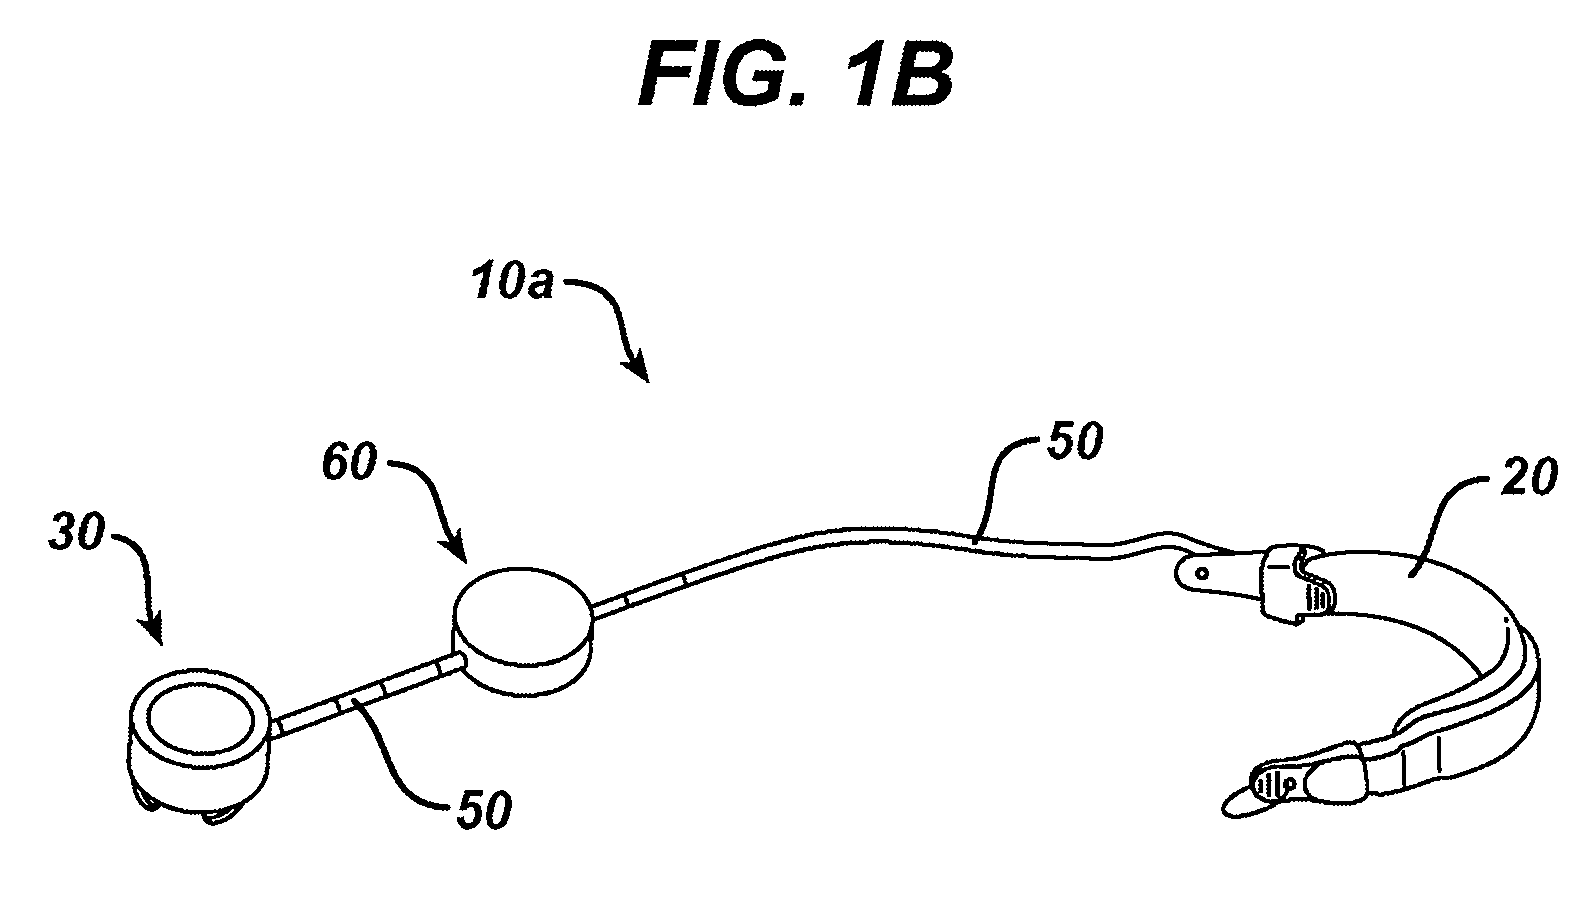 Methods and devices for measuring impedance in a gastric restriction system